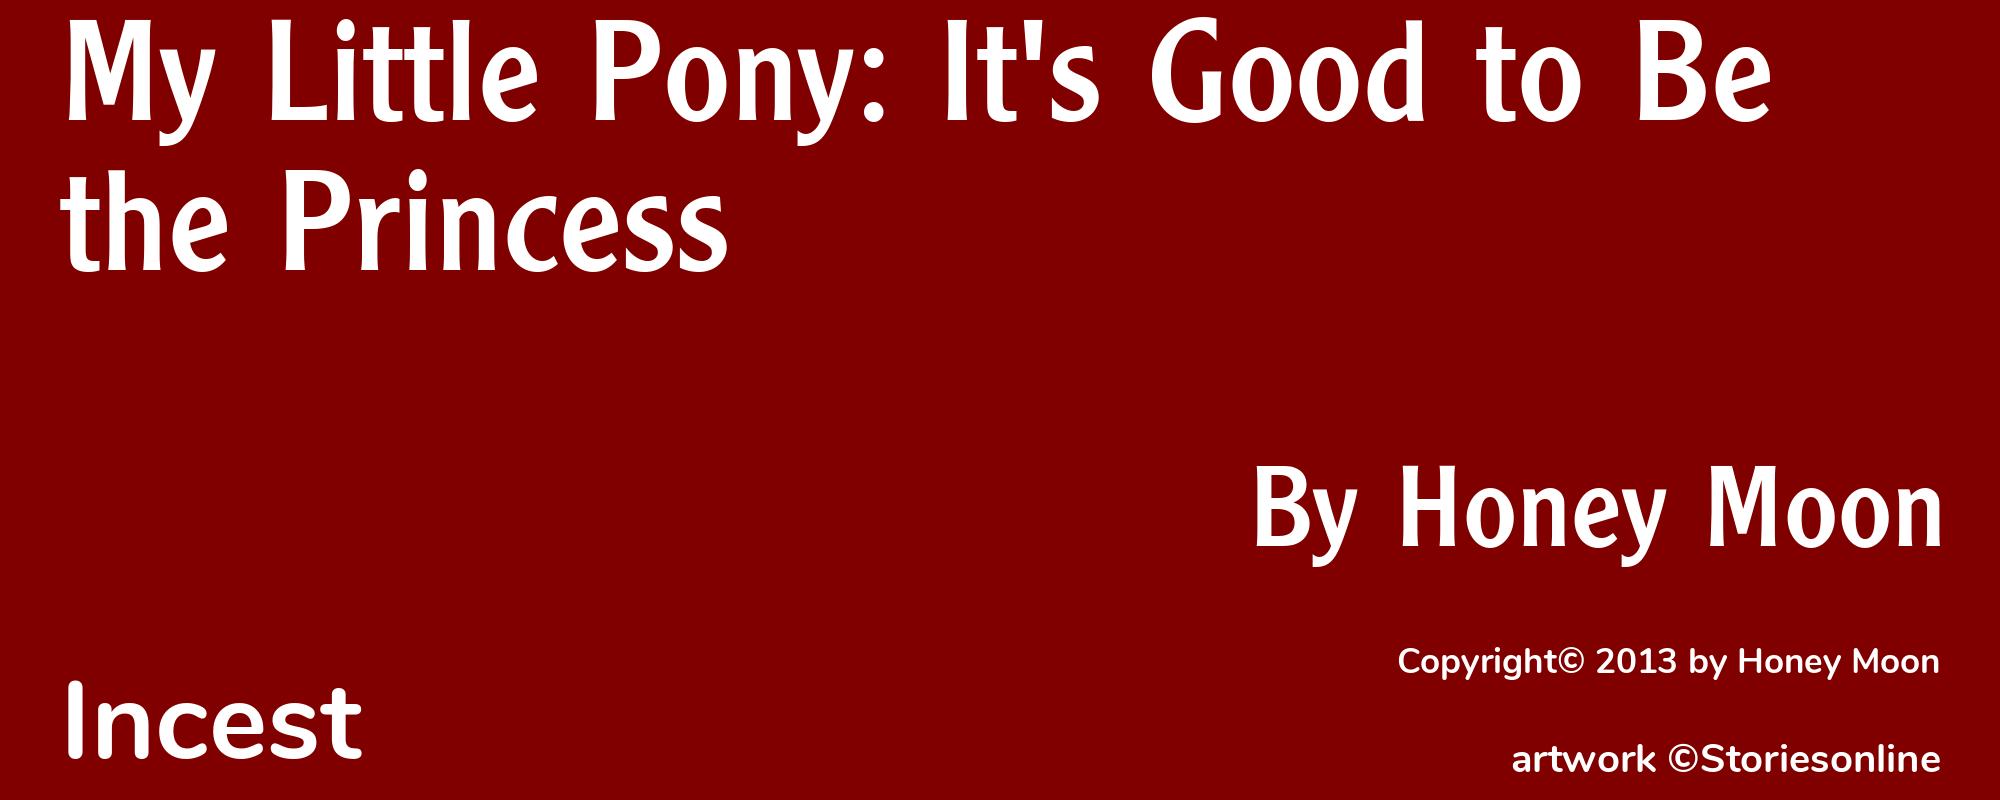 My Little Pony: It's Good to Be the Princess - Cover